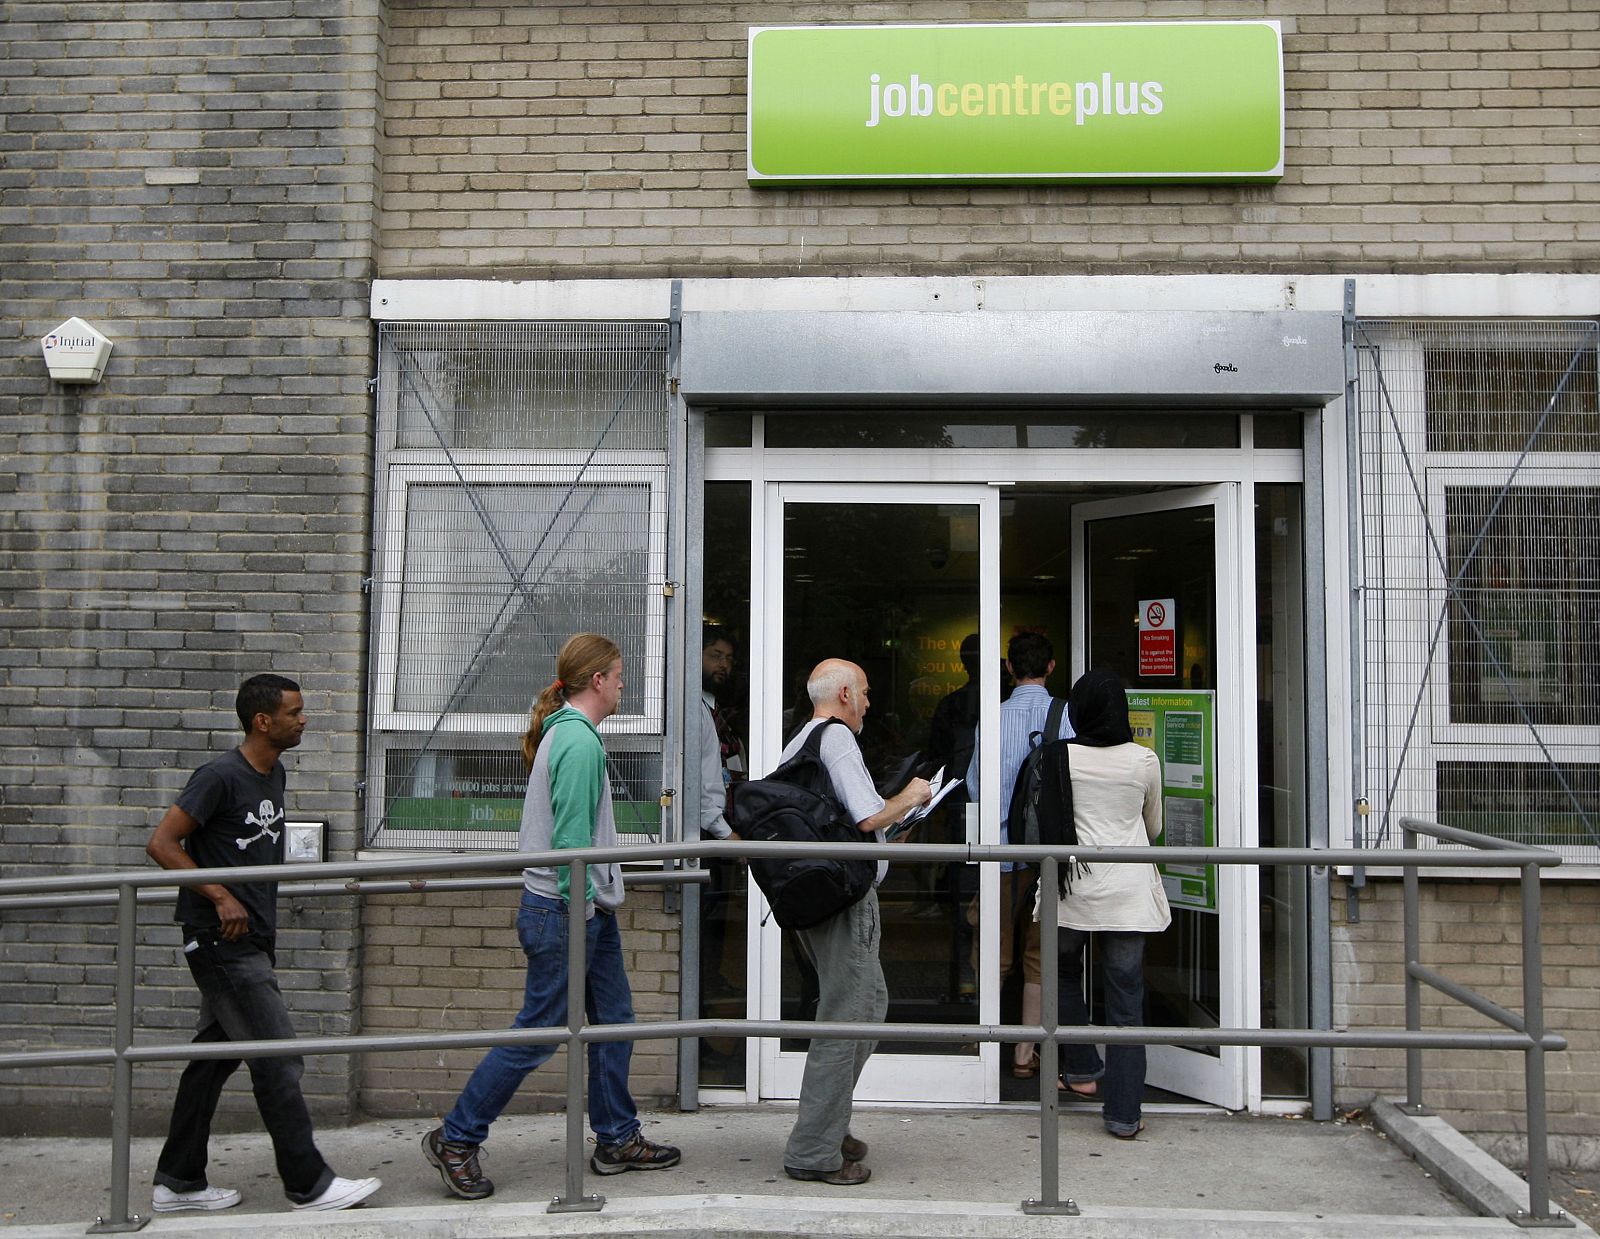 People enter a job centre in London